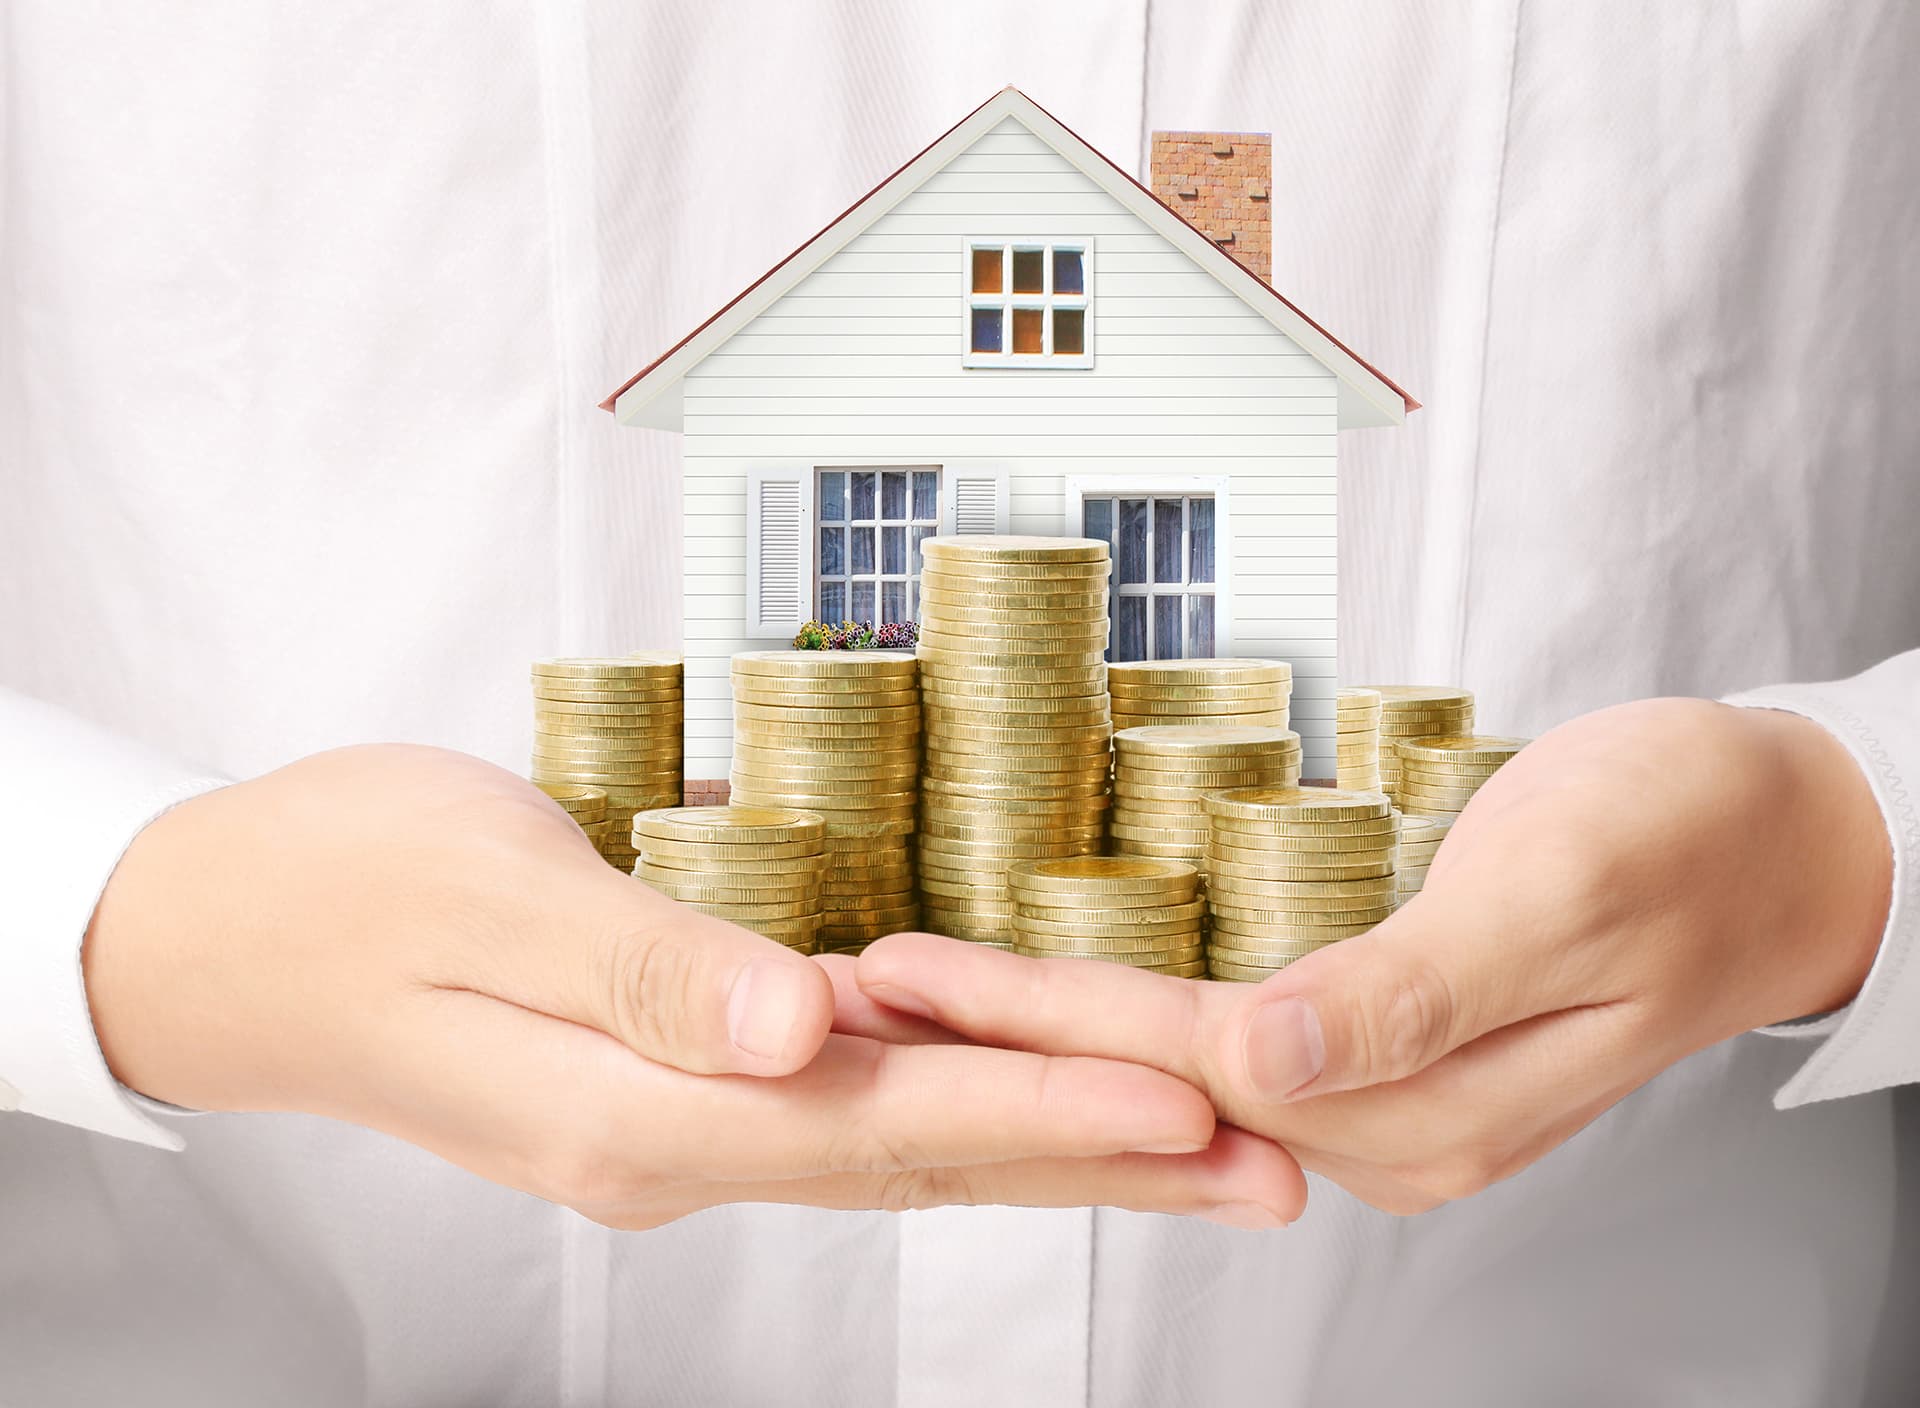 Using the Dormant Wealth Buried in Home Equity